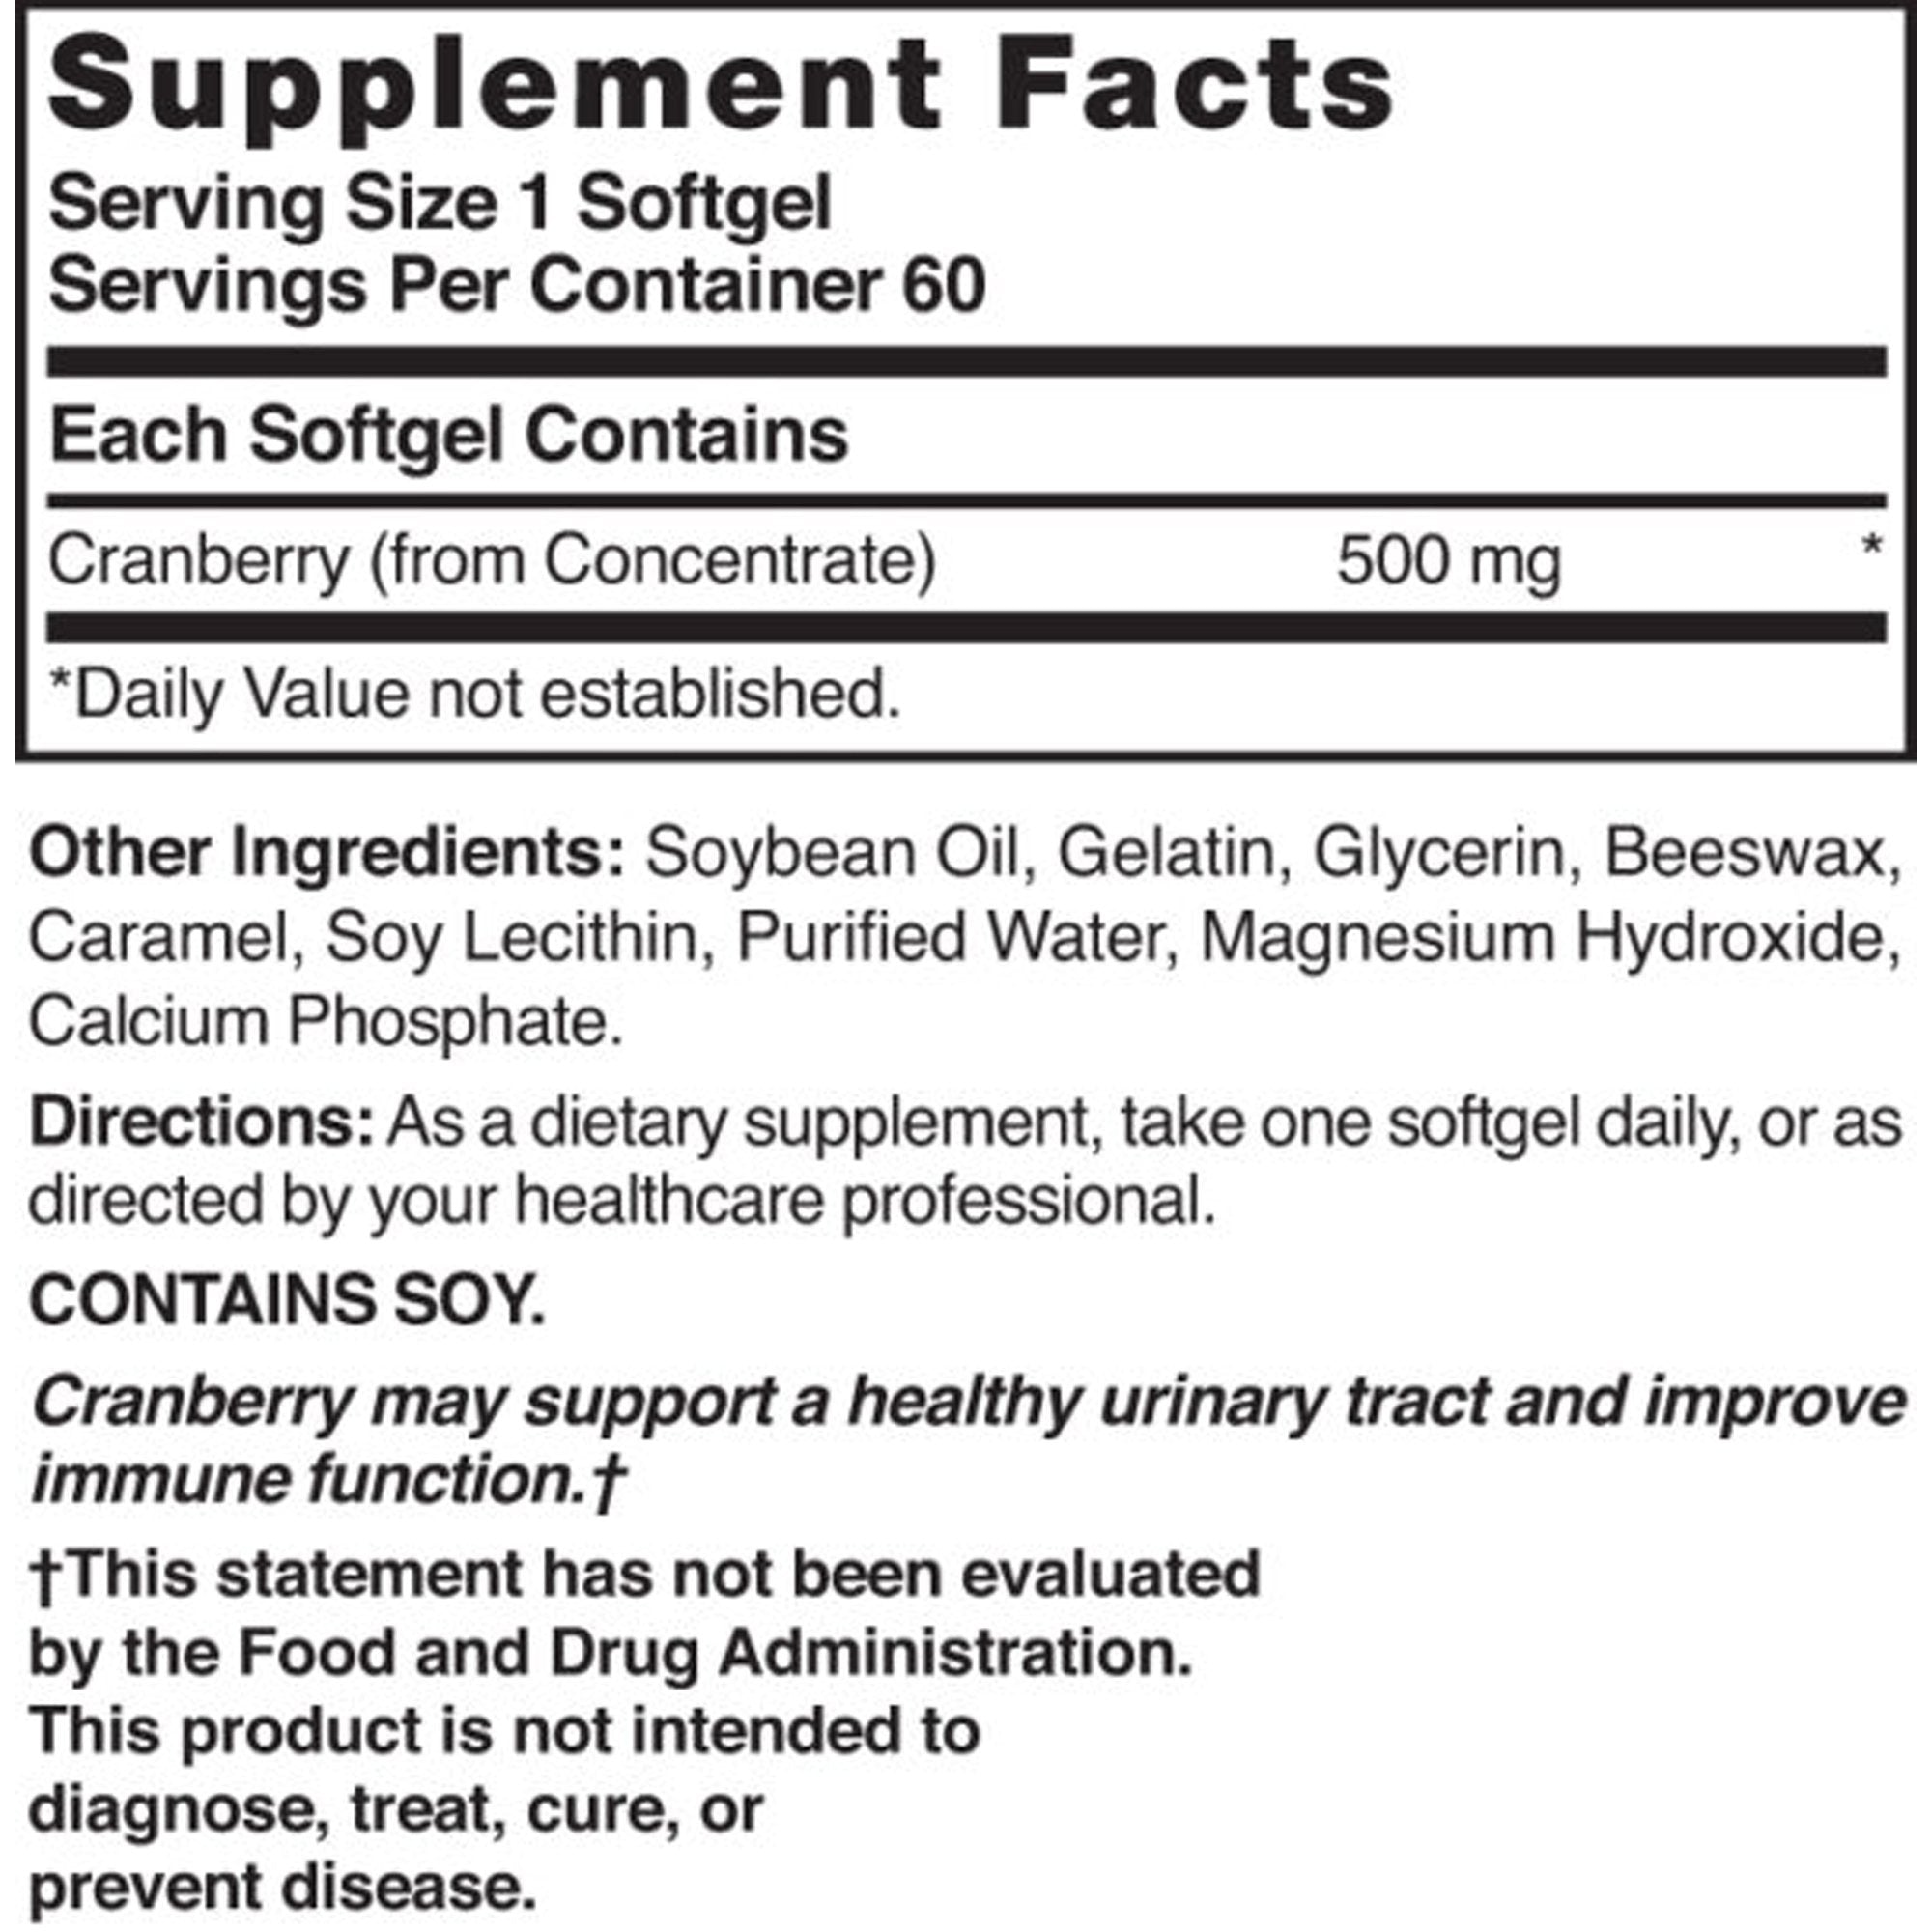 Herbal Supplement Nature's Blend Cranberry Concentrate 500 mg Strength Softgel 60 per Bottle Cranberry Flavor